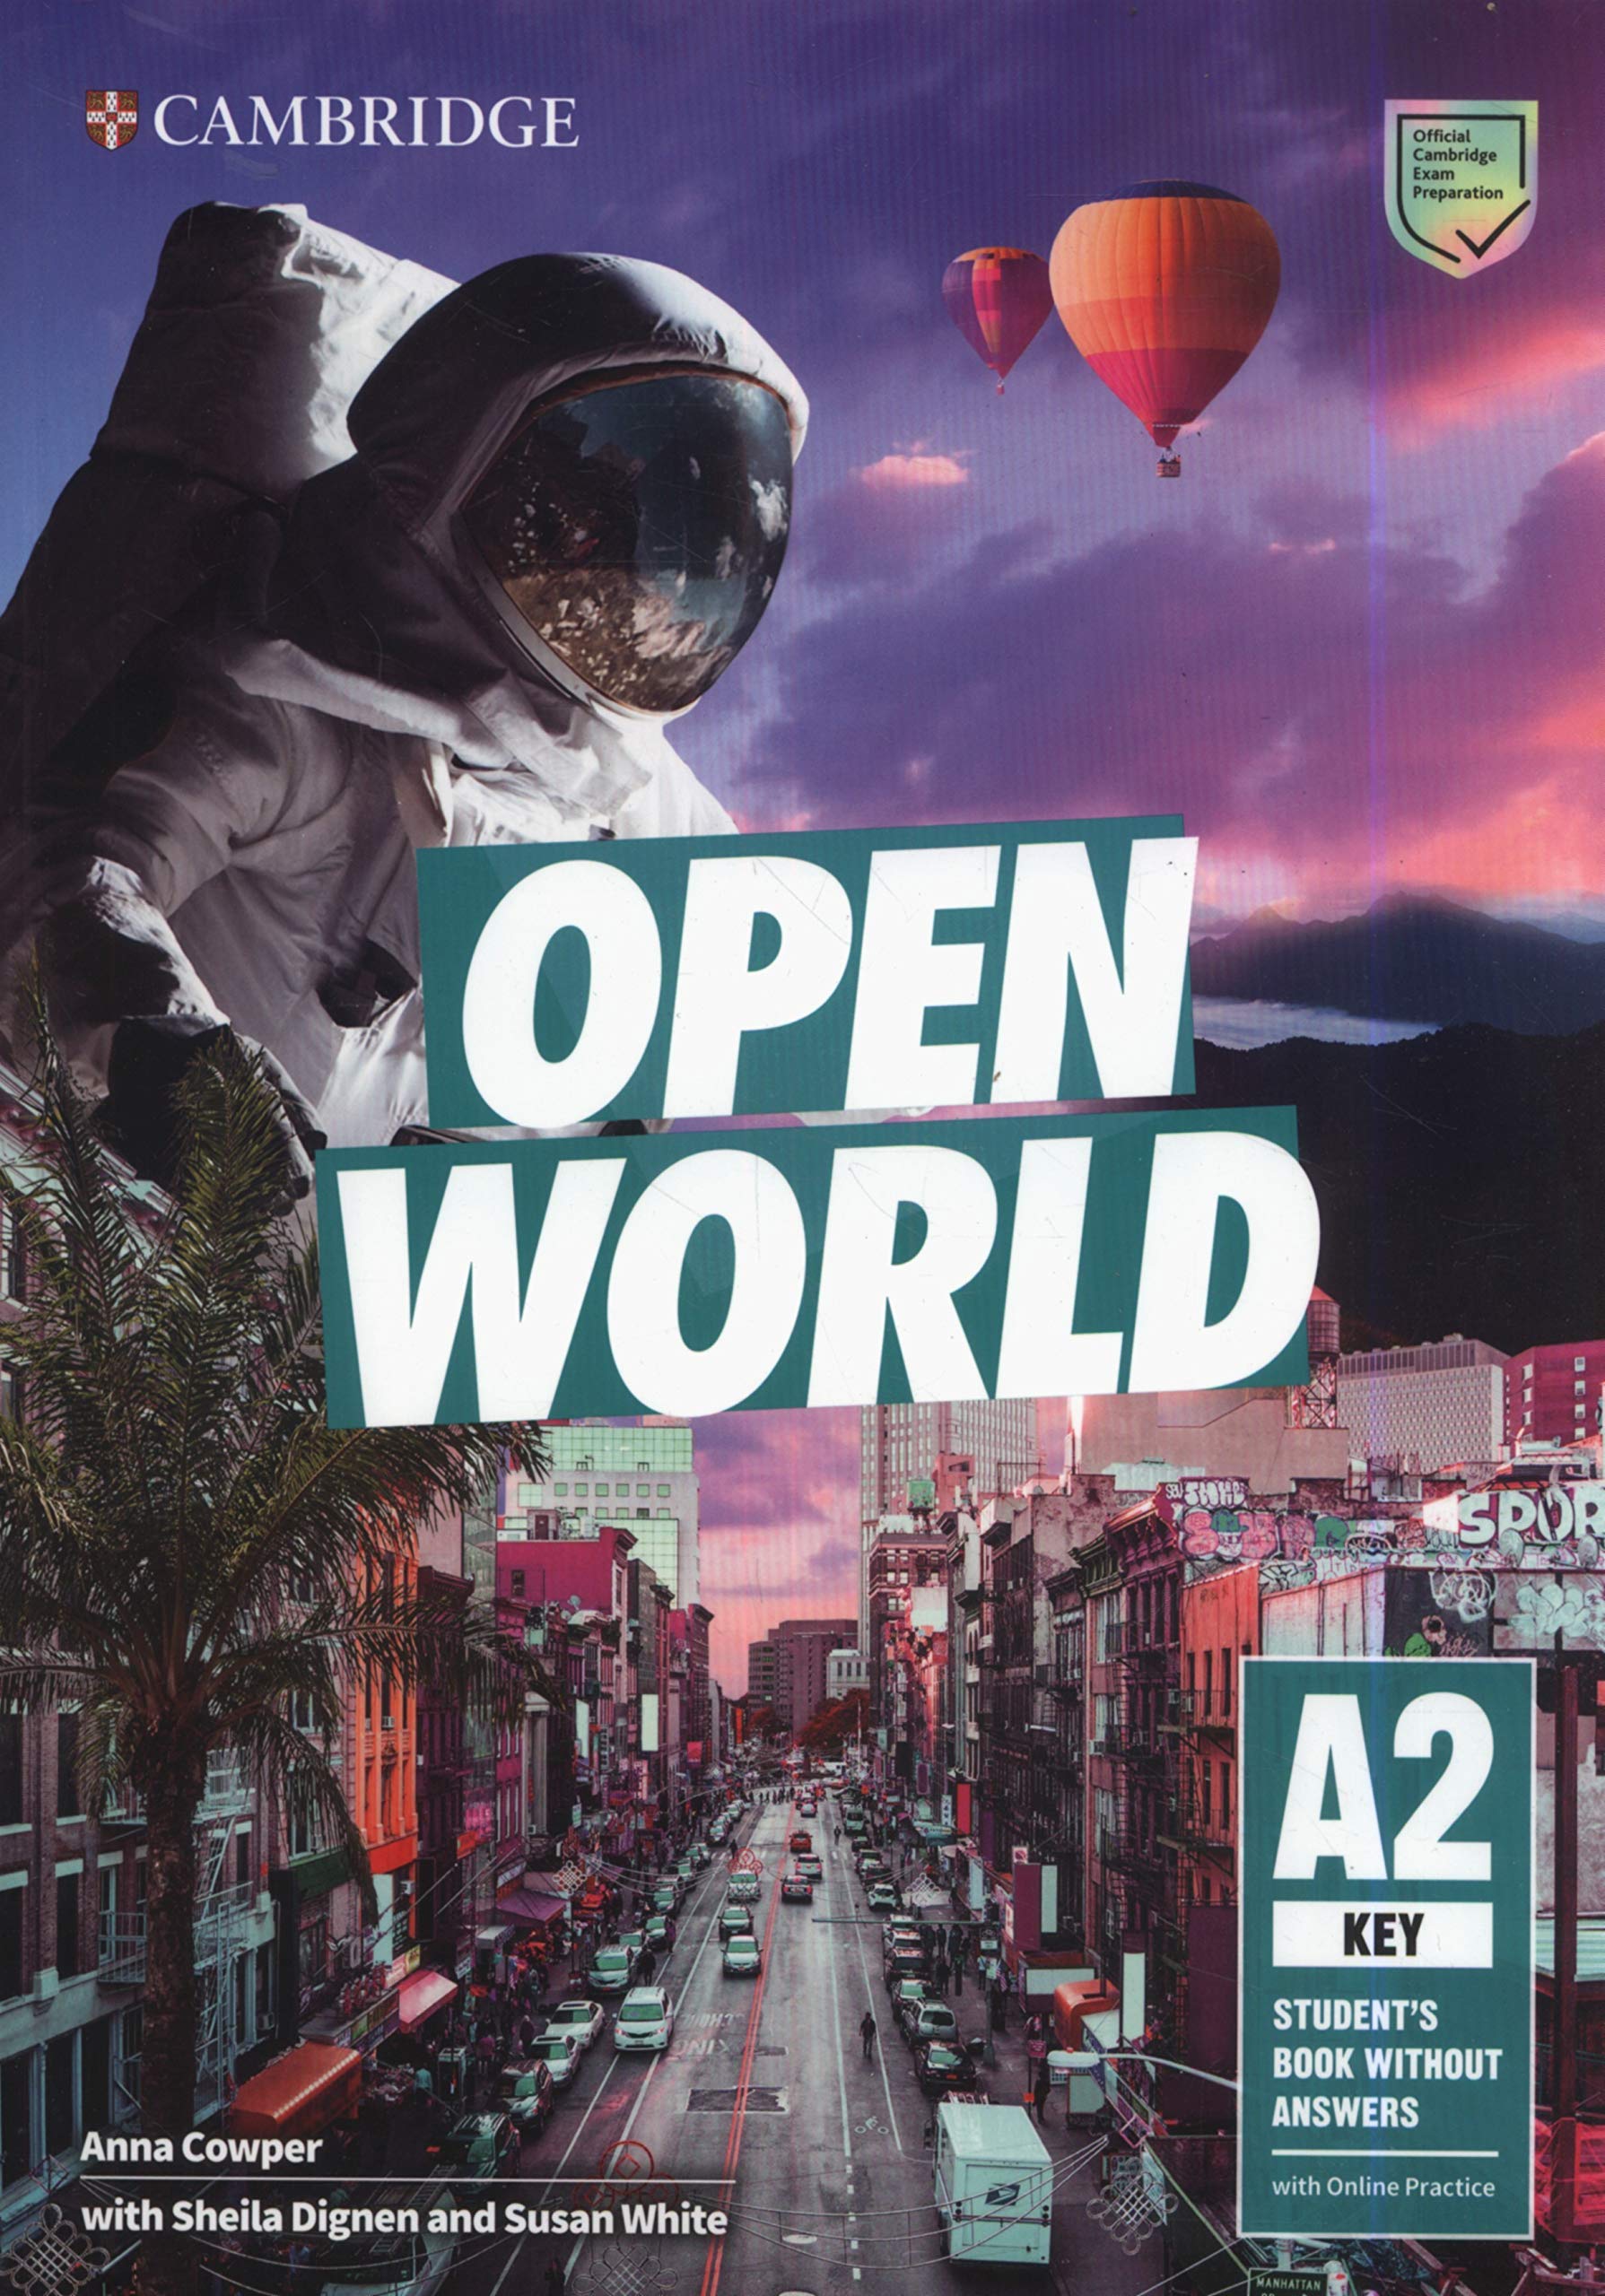 OPEN WORLD KEY Student's Book without Answers + Online Practice